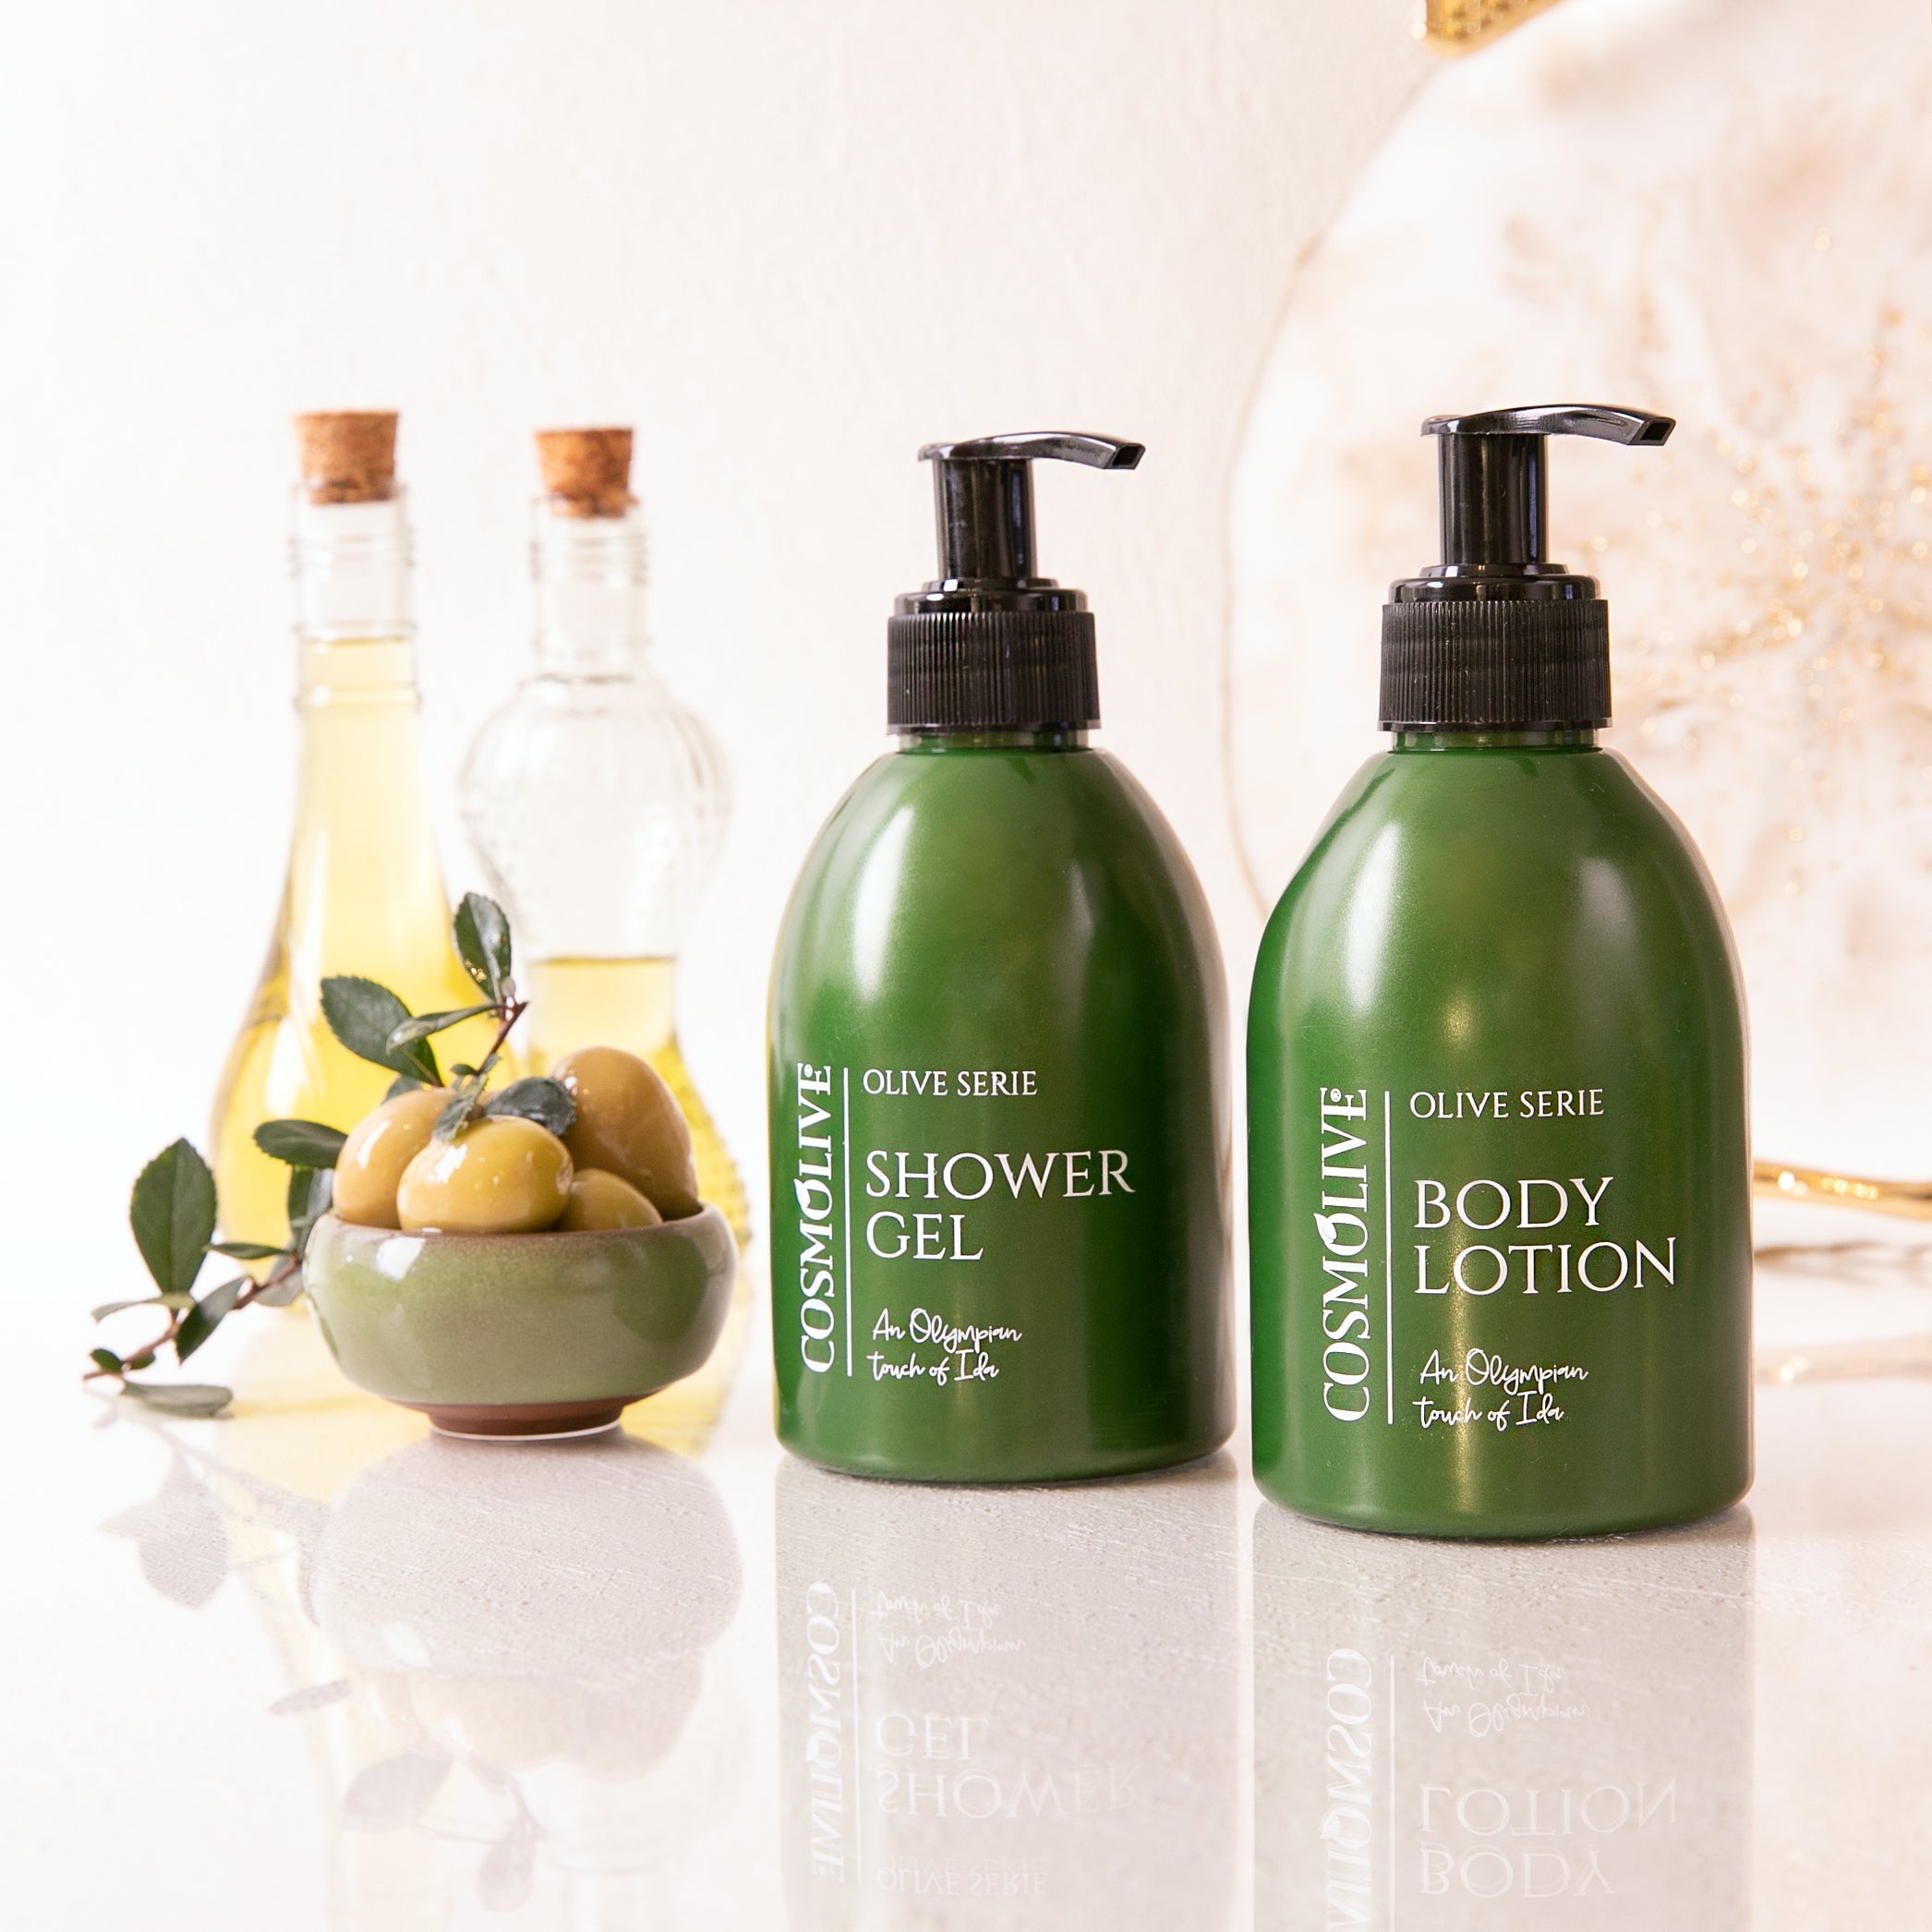 COSMOLIVE OLIVE SERIE SHOWER GEL + BODY LOTION ( 1+ 1 ) 300 ml + 300 ml